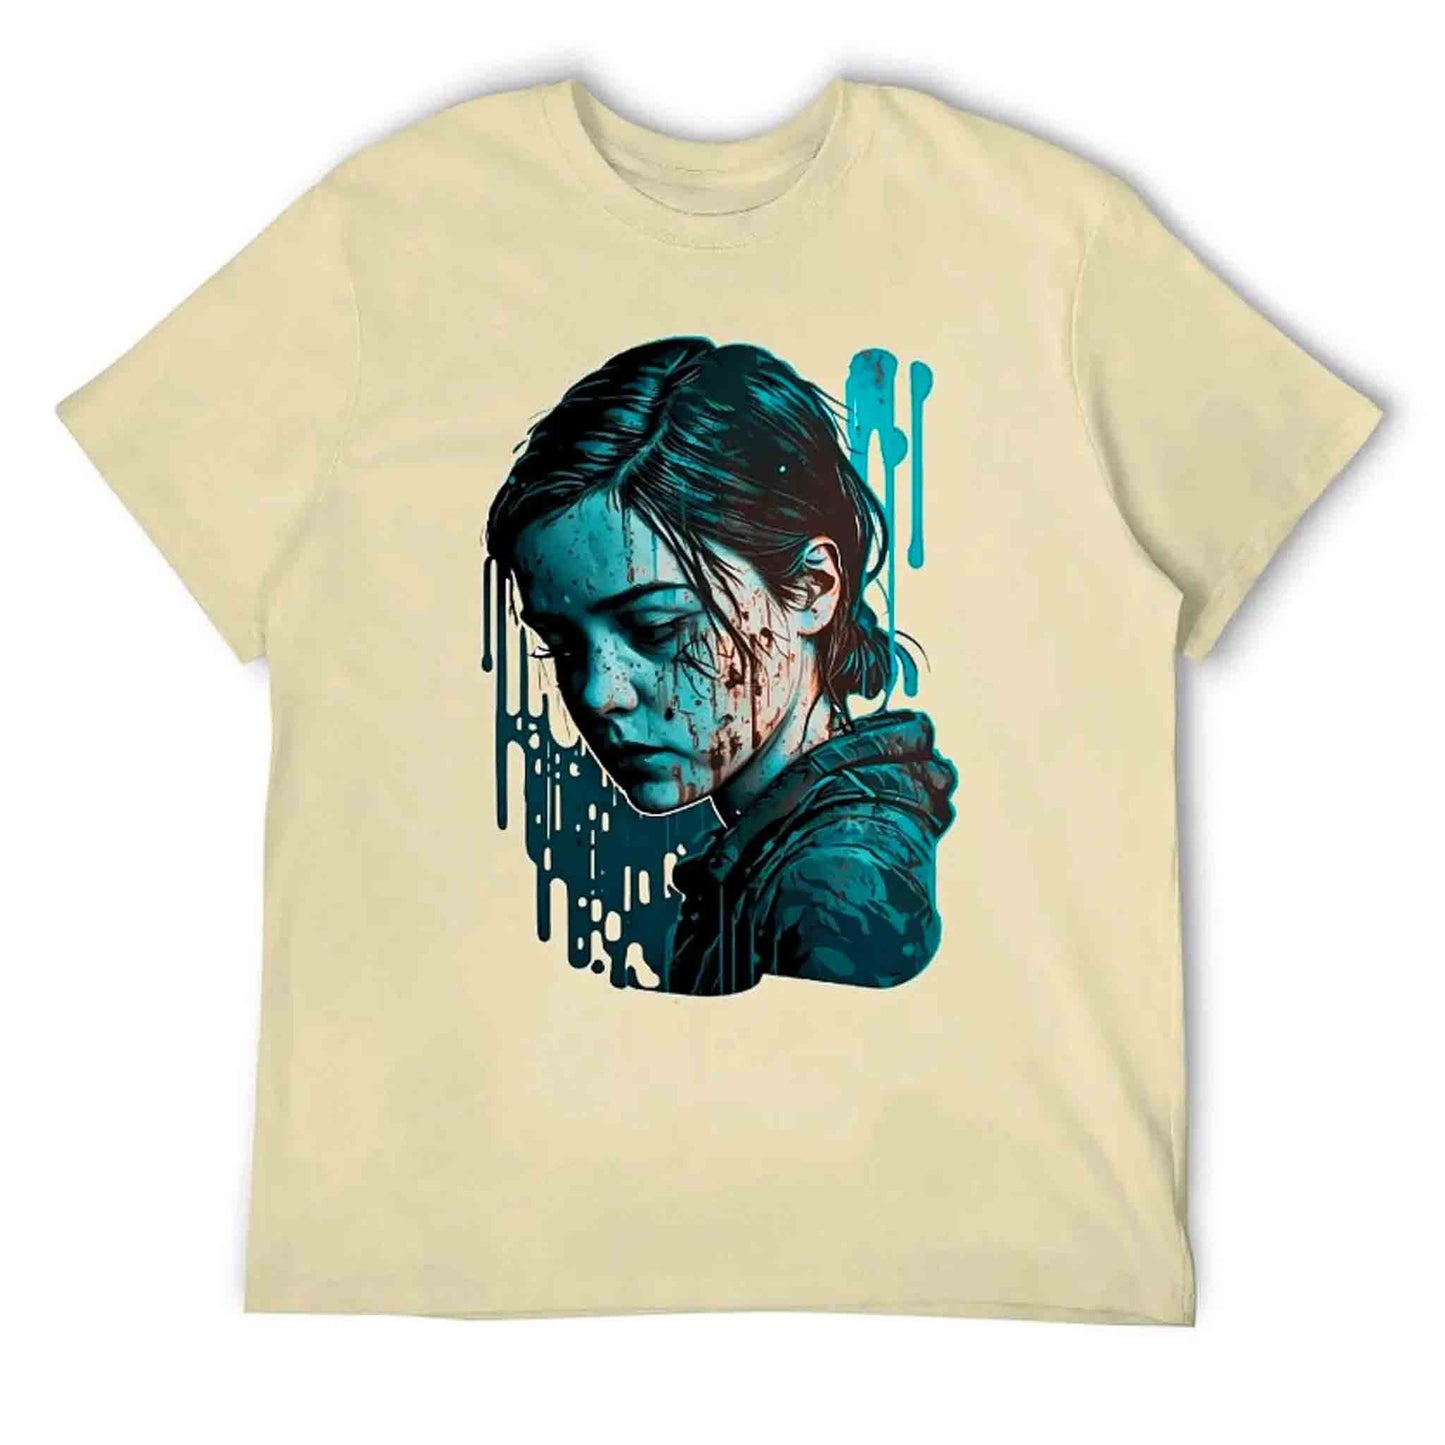 The Last of Us Ellie Artistic Tshirt - Khaki / 3XL Available at 2Fast2See.co